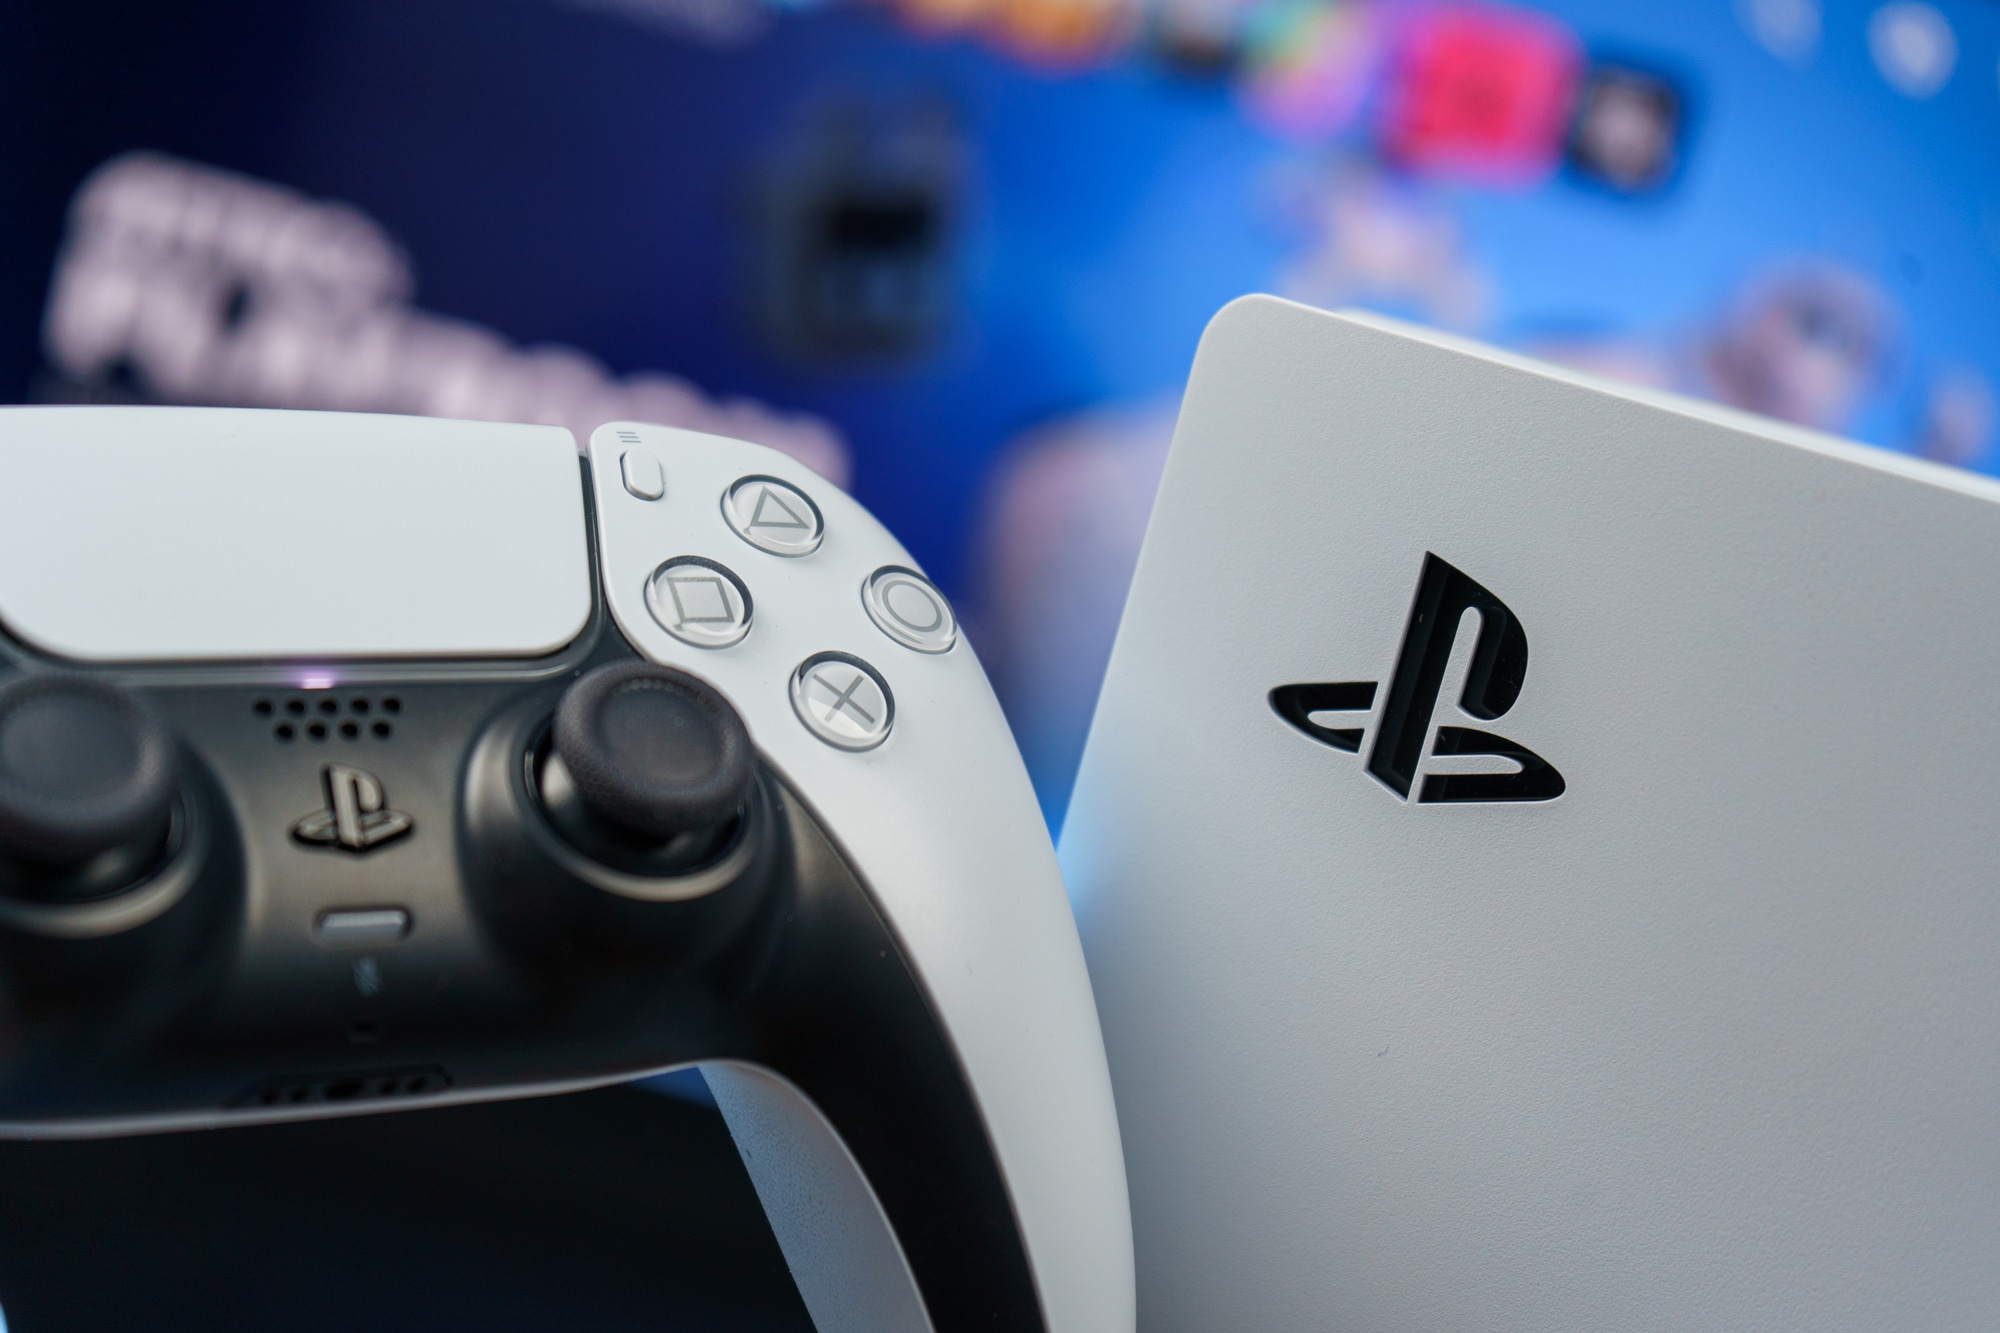 In the UK, a 6 billion euro class action action has started against Sony thumbnail